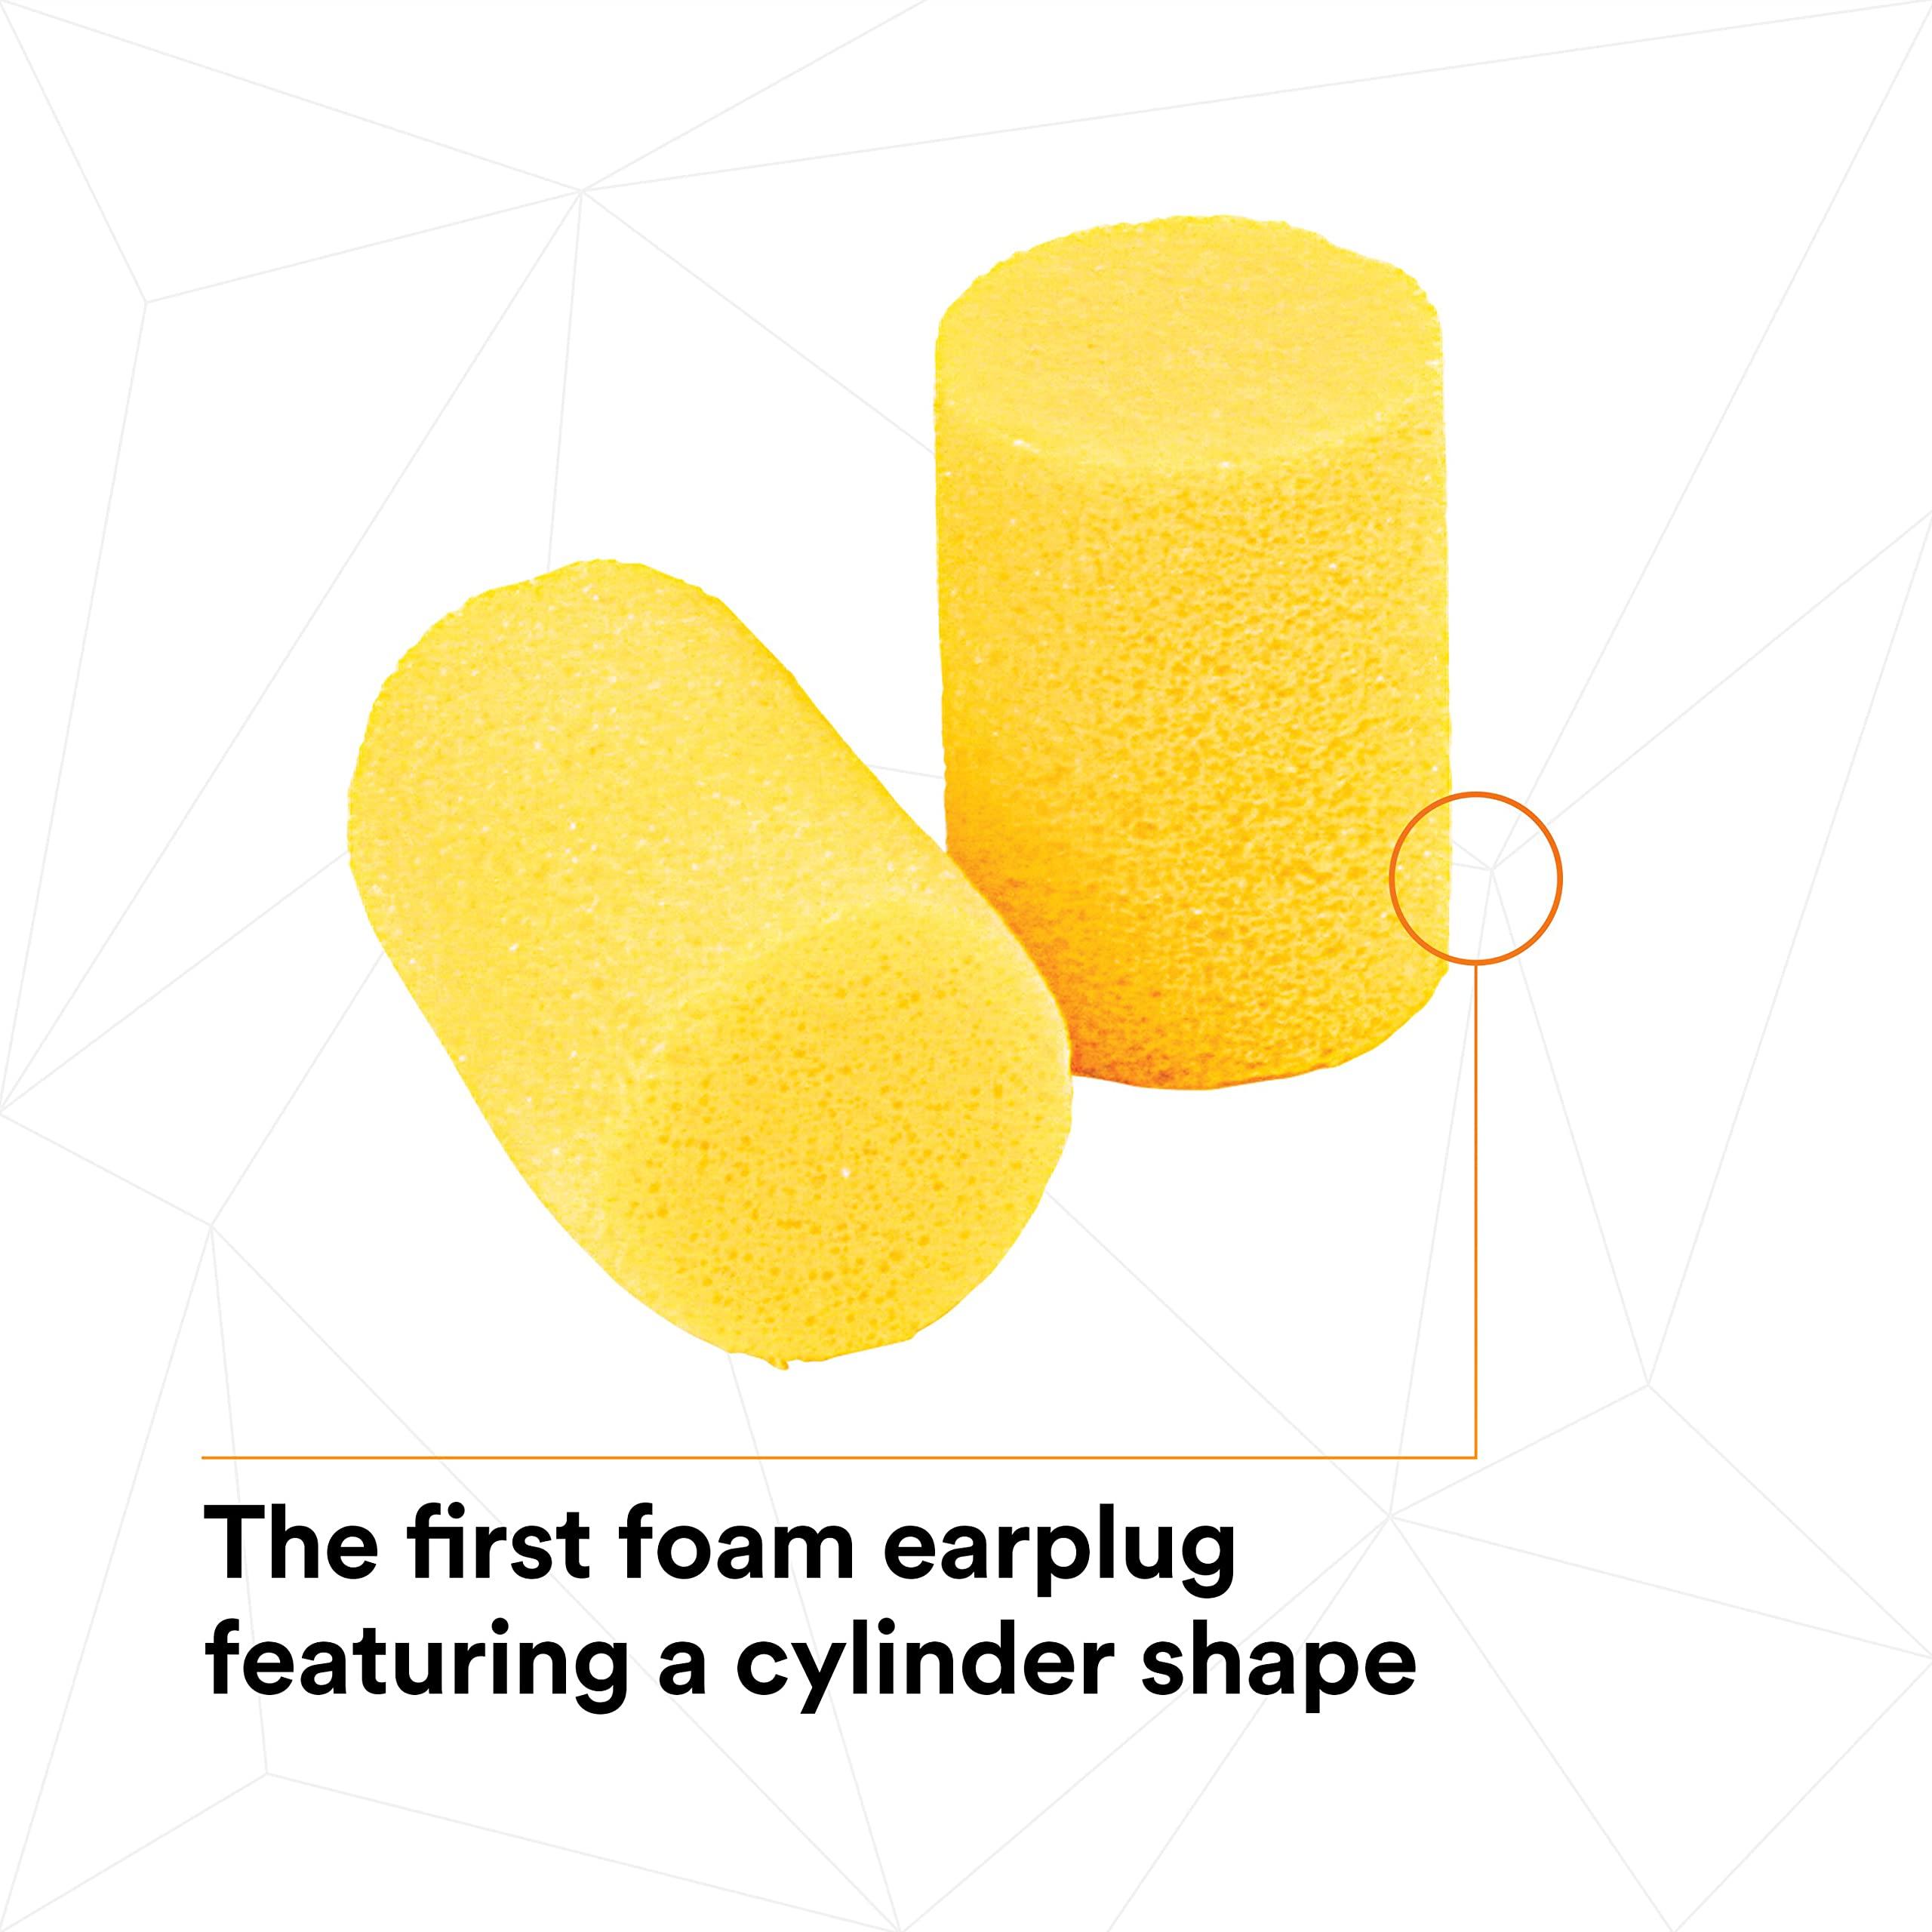 3M Ear Plugs, 200 Pairs/Box, E-A-R Classic 312-1201, Uncorded, Disposable, Foam, NRR 29, For Drilling, Grinding, Machining, Sawing, Sanding, Welding, 1 Pair/Poly Bag Yellow